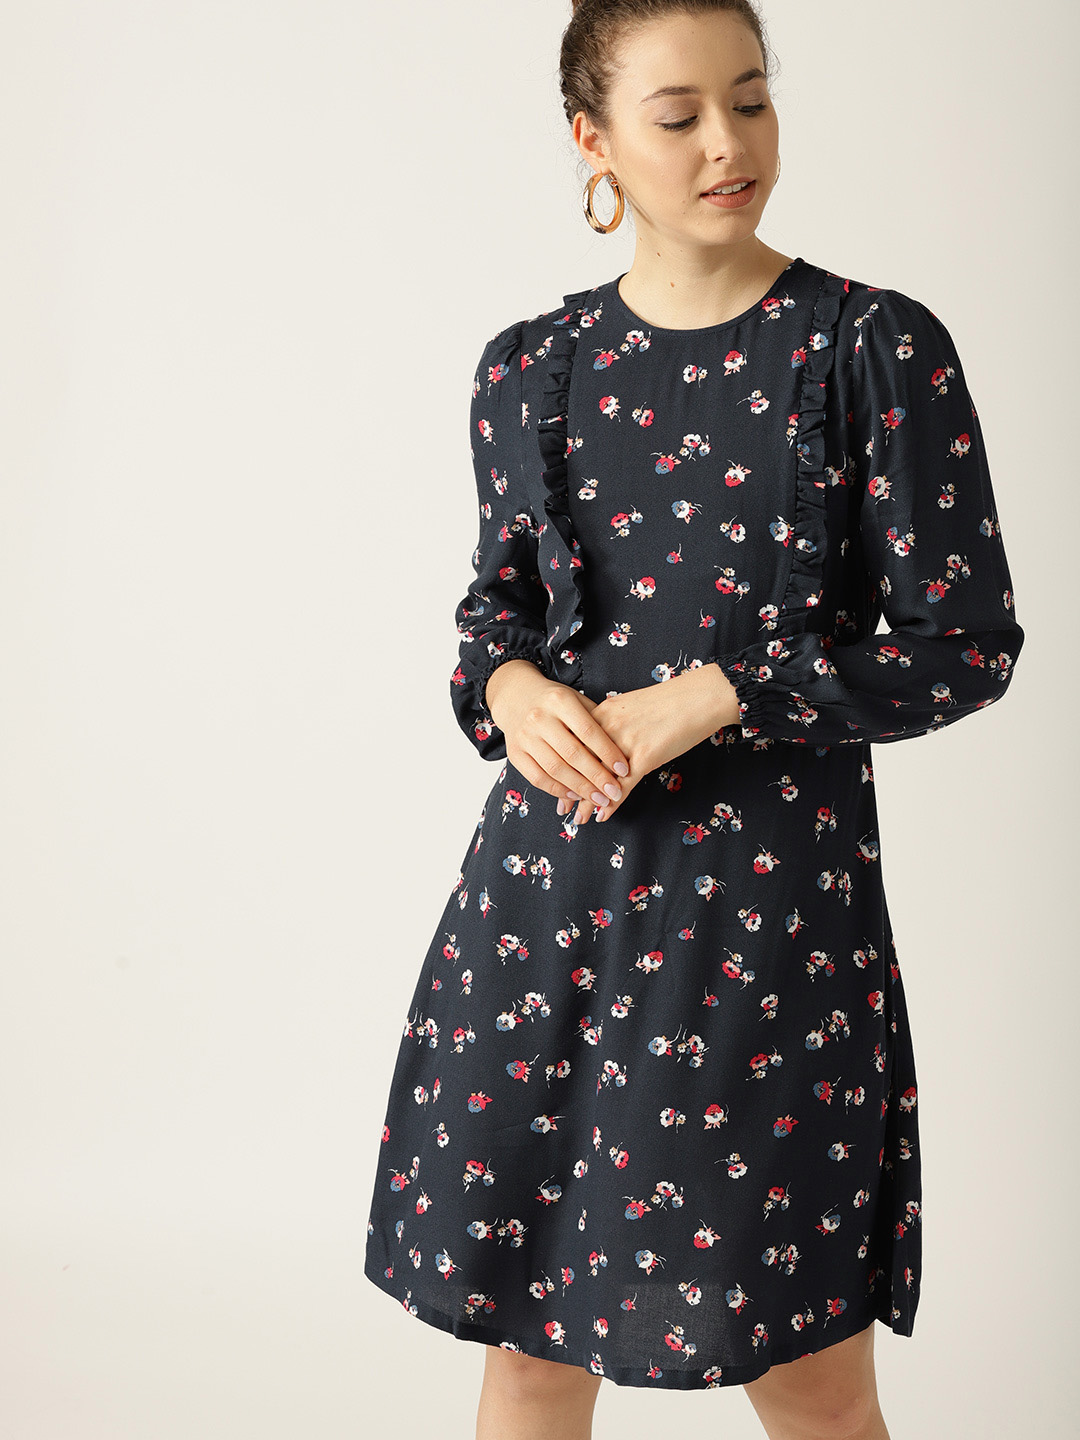 ESPRIT Women Navy Blue Printed A-Line Dress Price in India